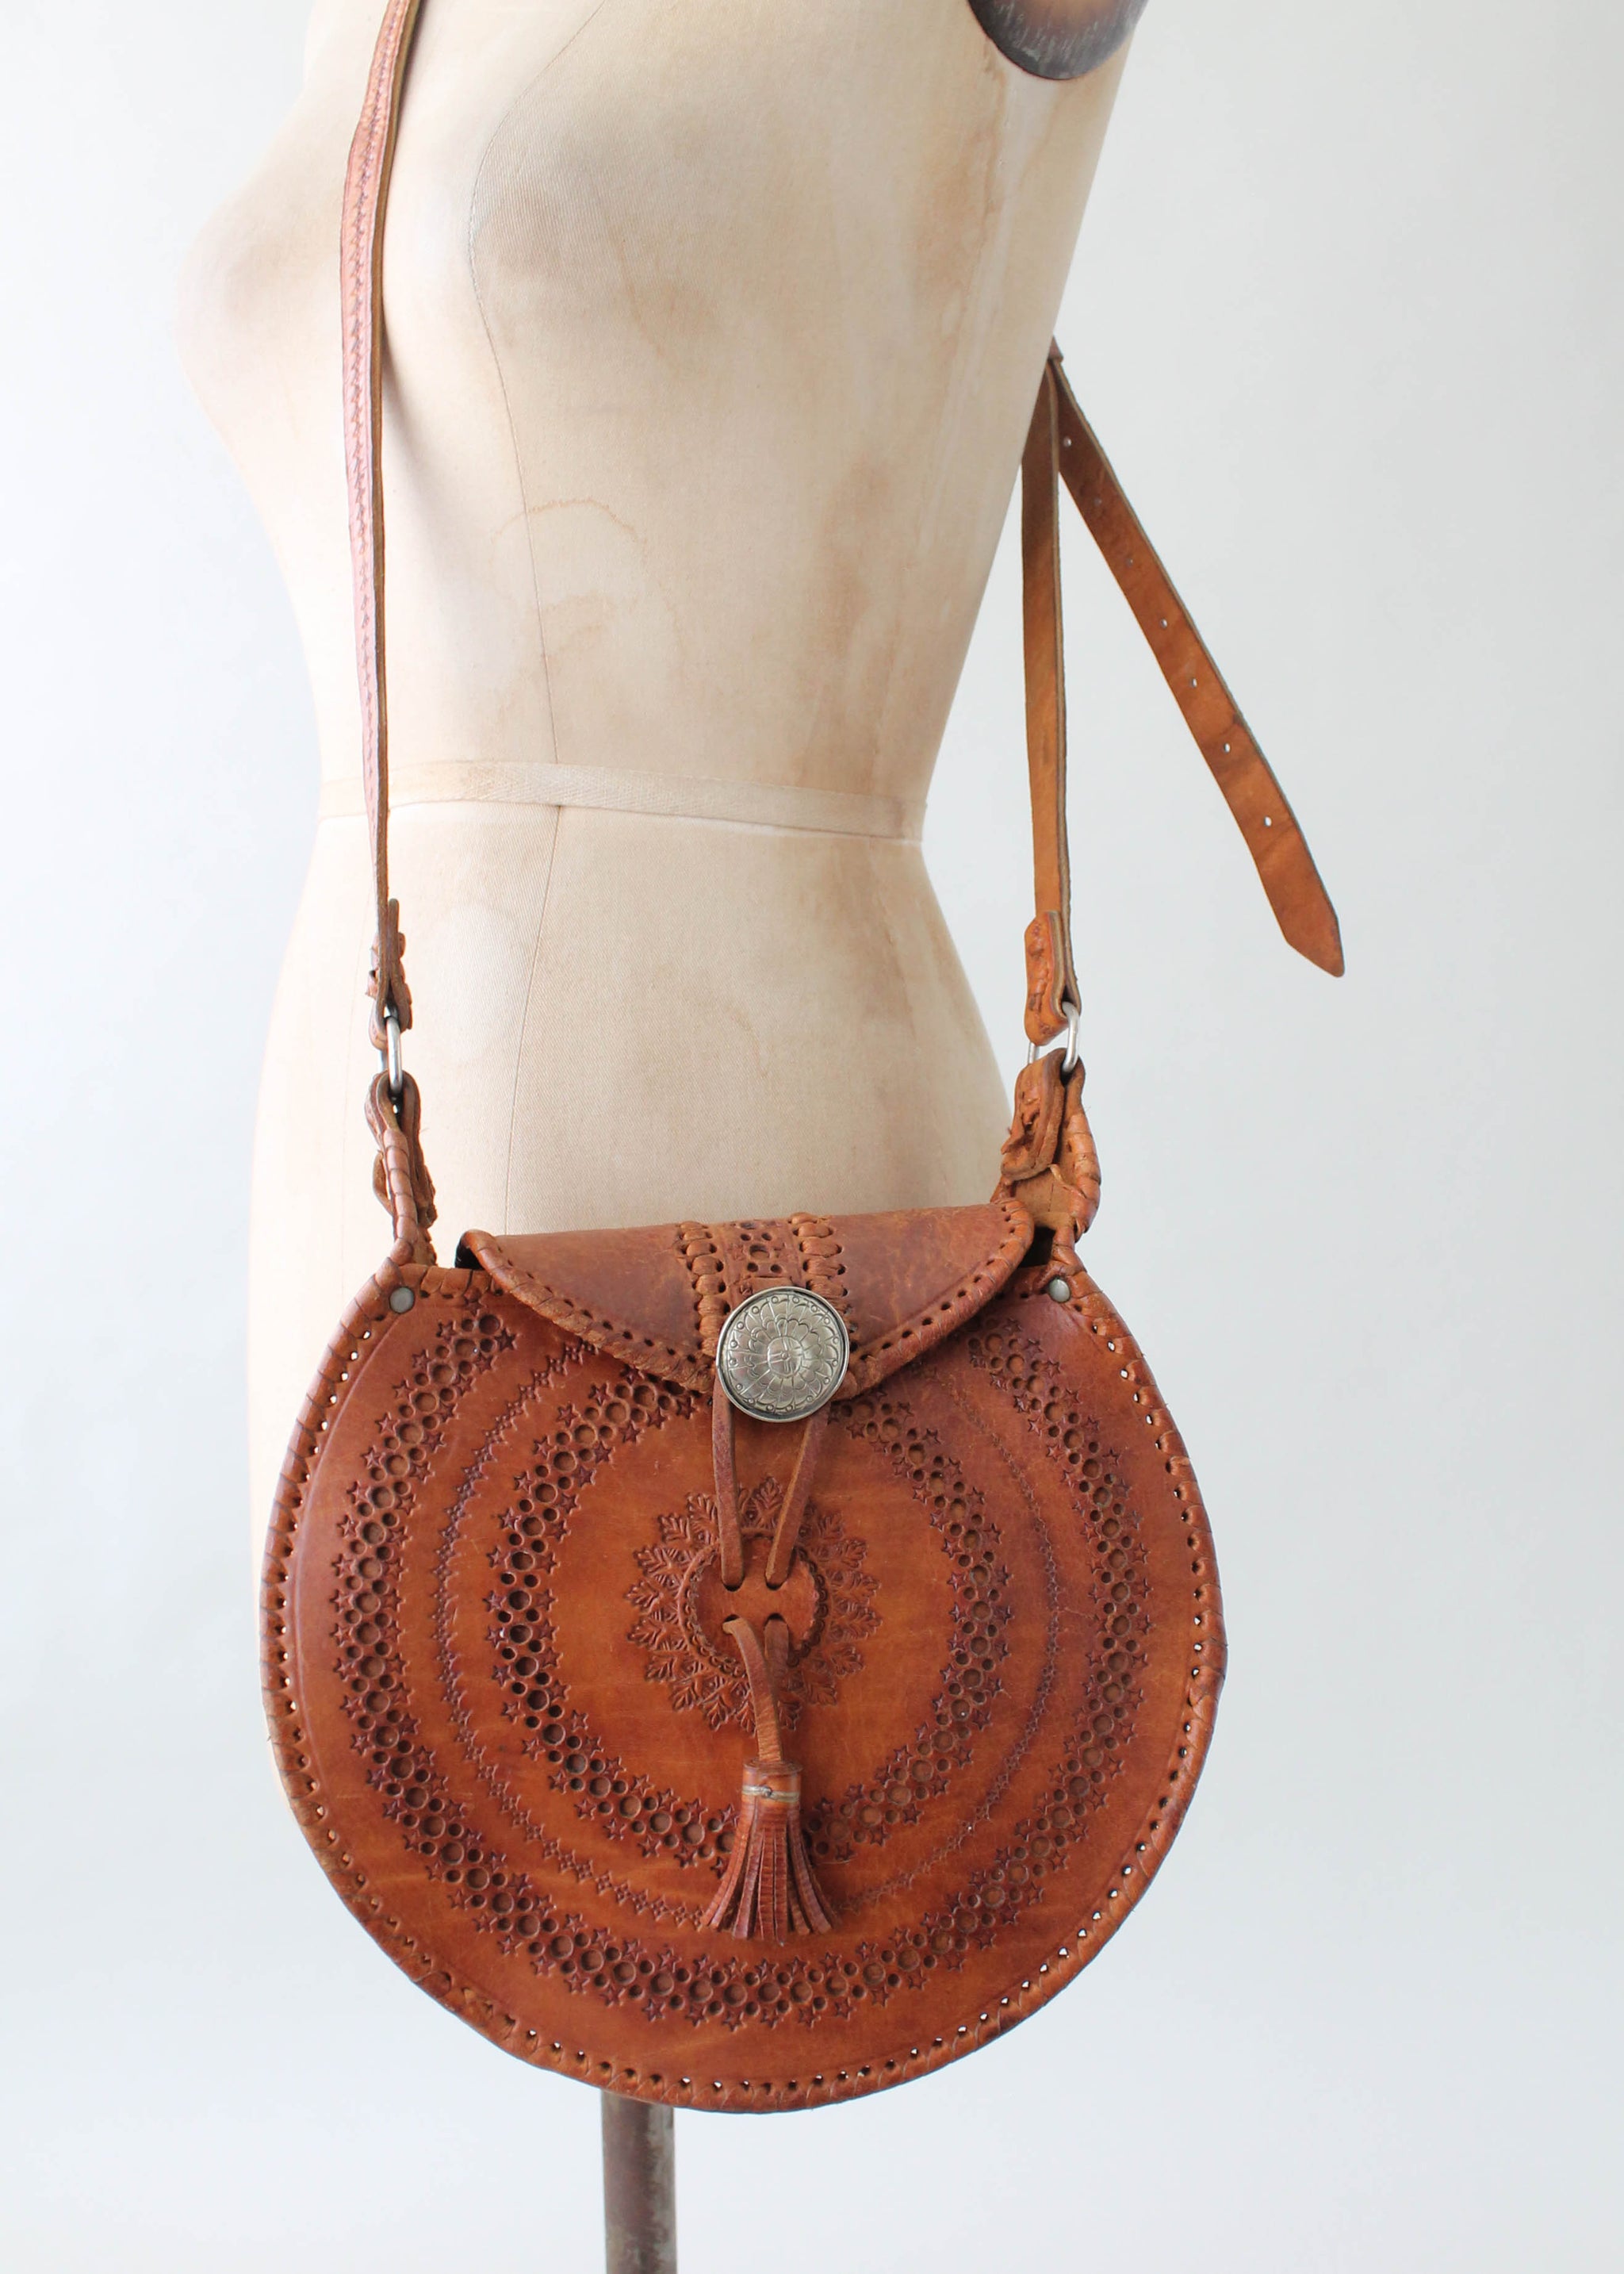 Vintage 1970s Moroccan Tooled Leather Round Purse | Round purse, Leather  bags handmade, Purses